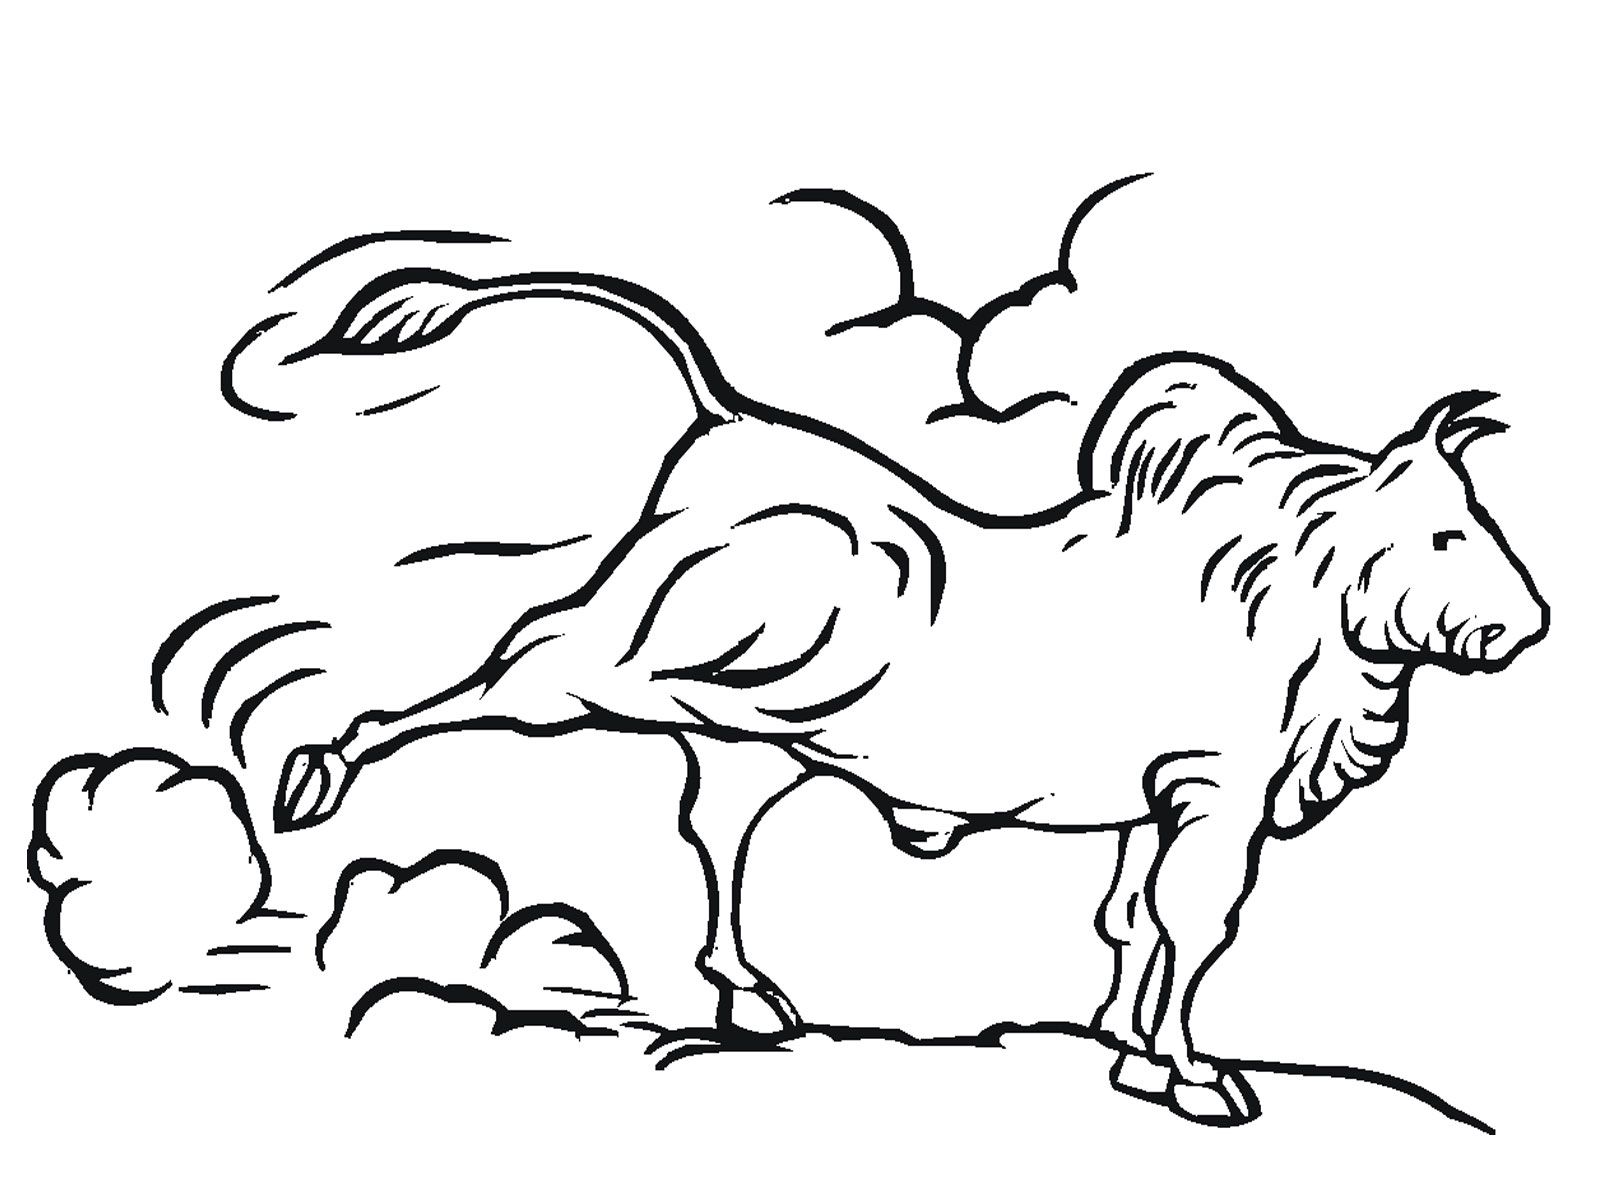 Bullriding Coloring Pages - Coloring Pages For All Ages